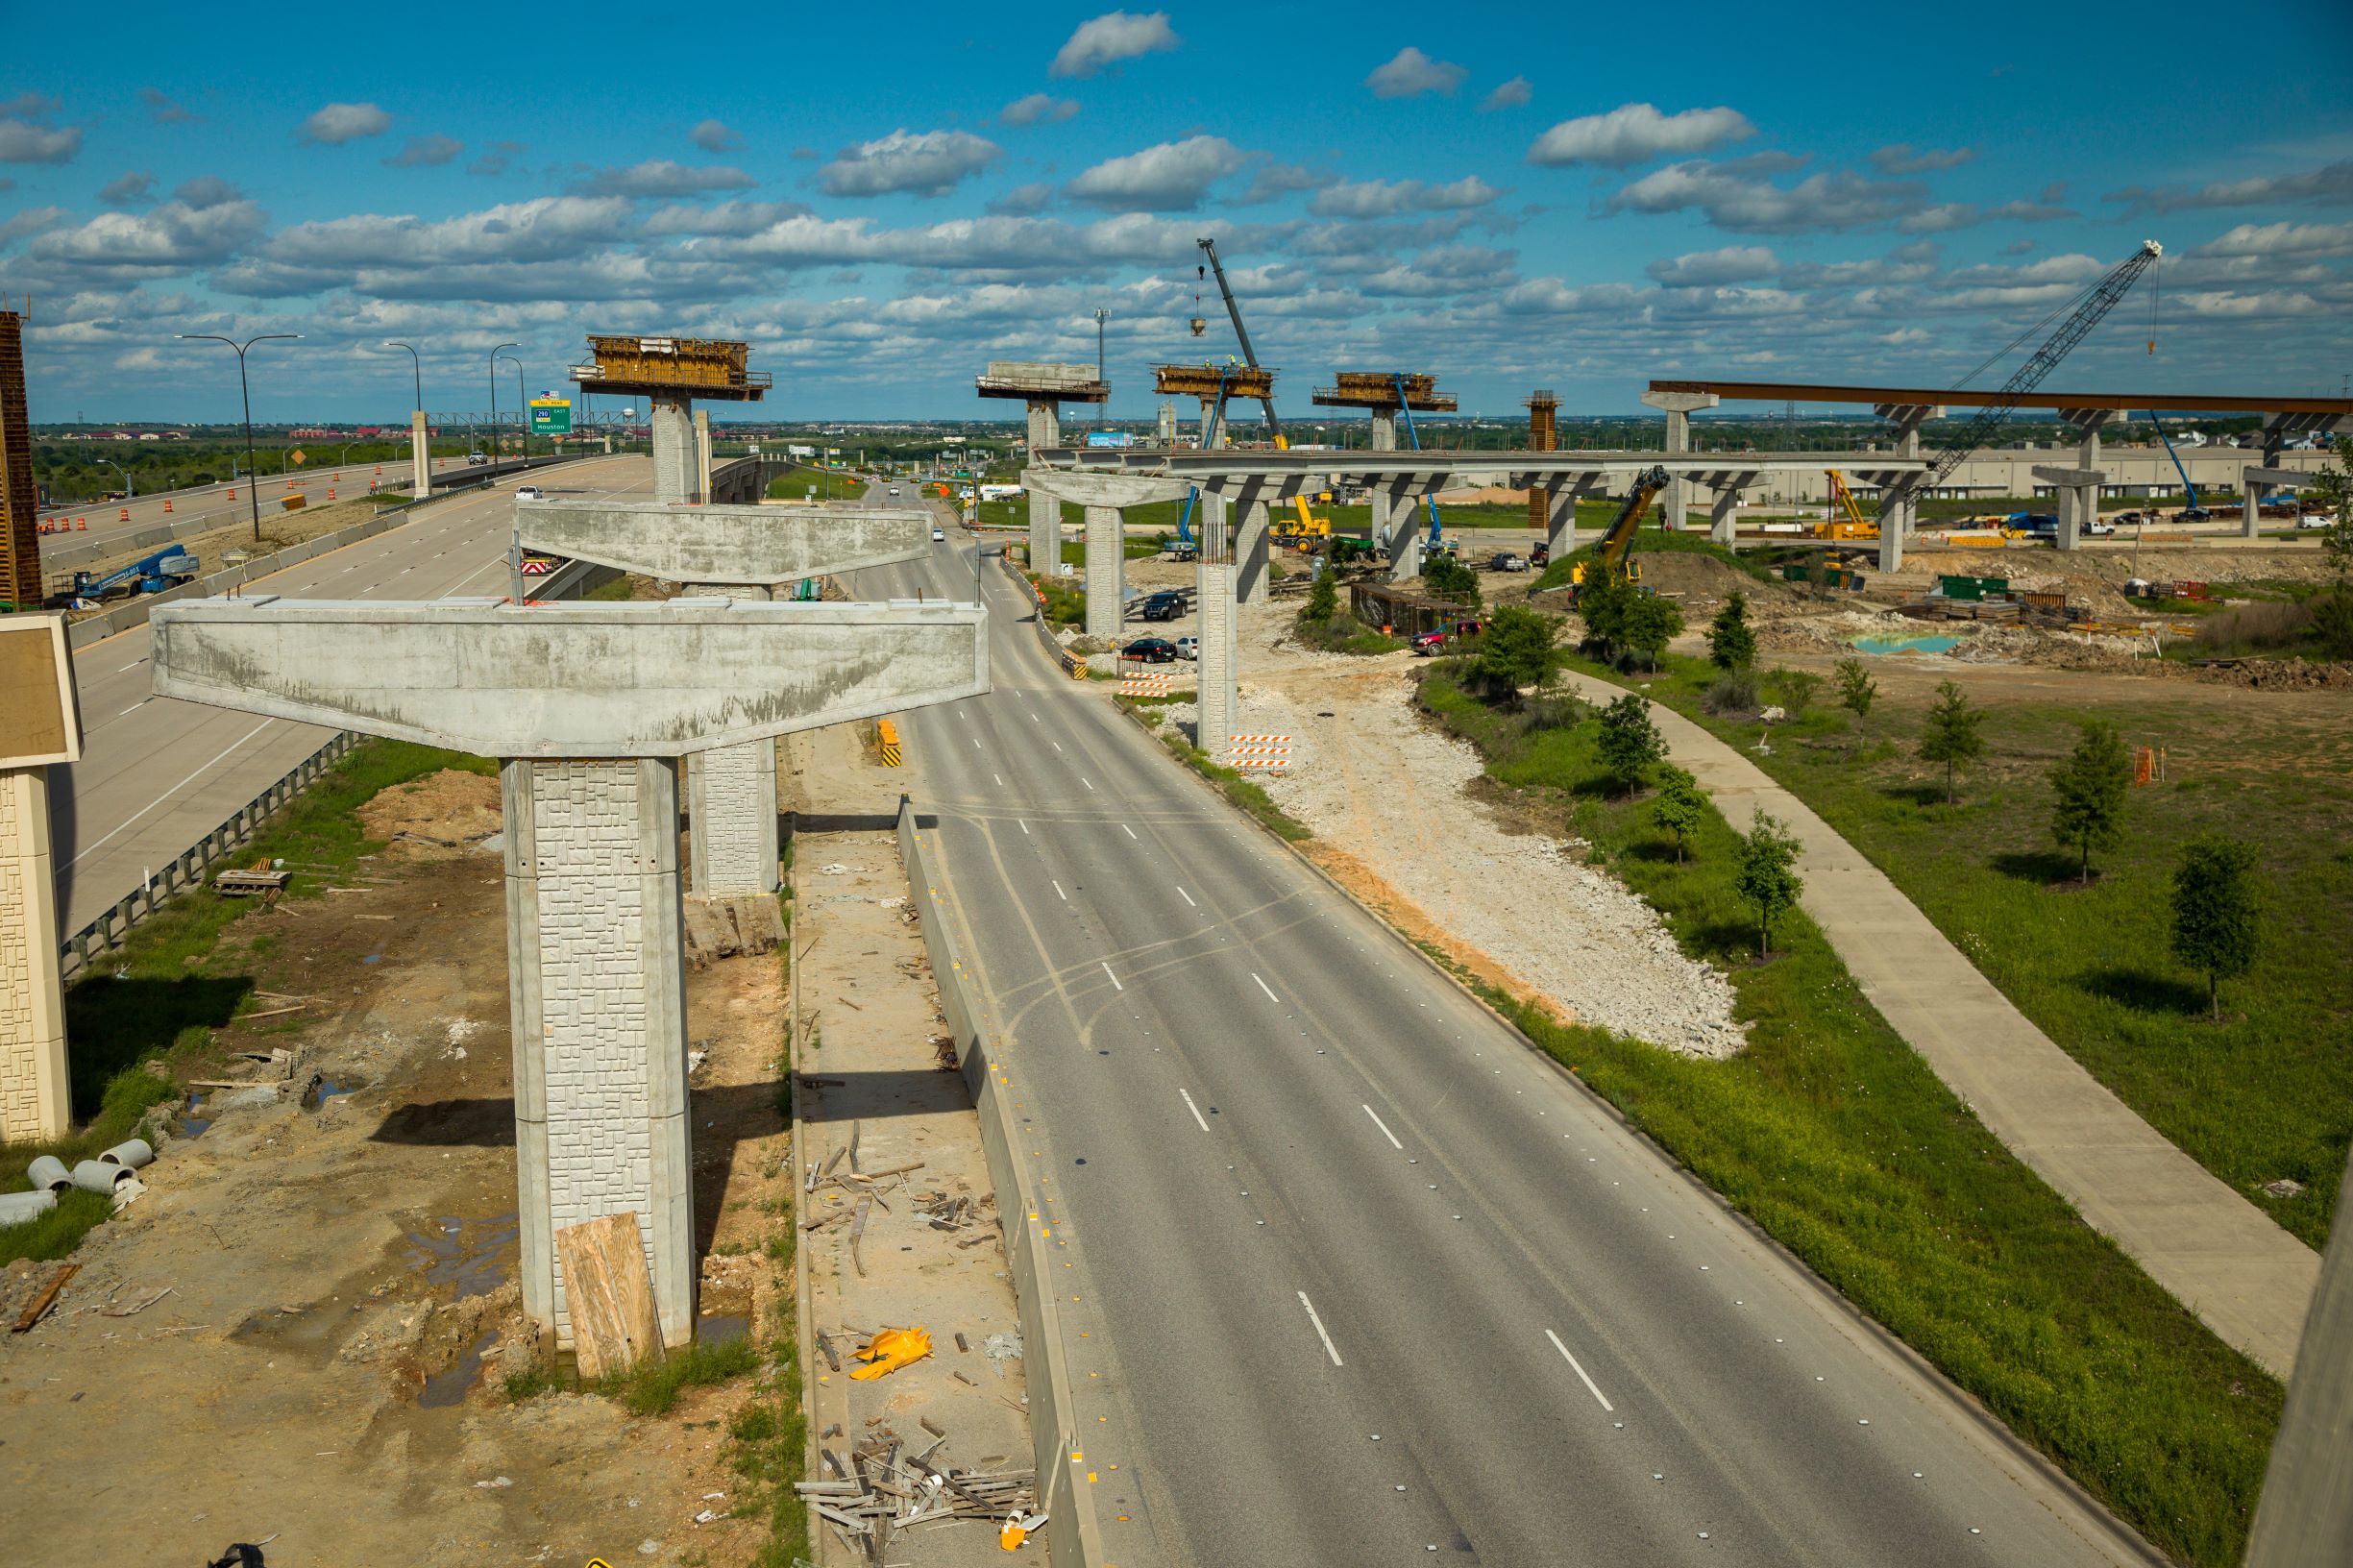 290/130 Flyovers Construction